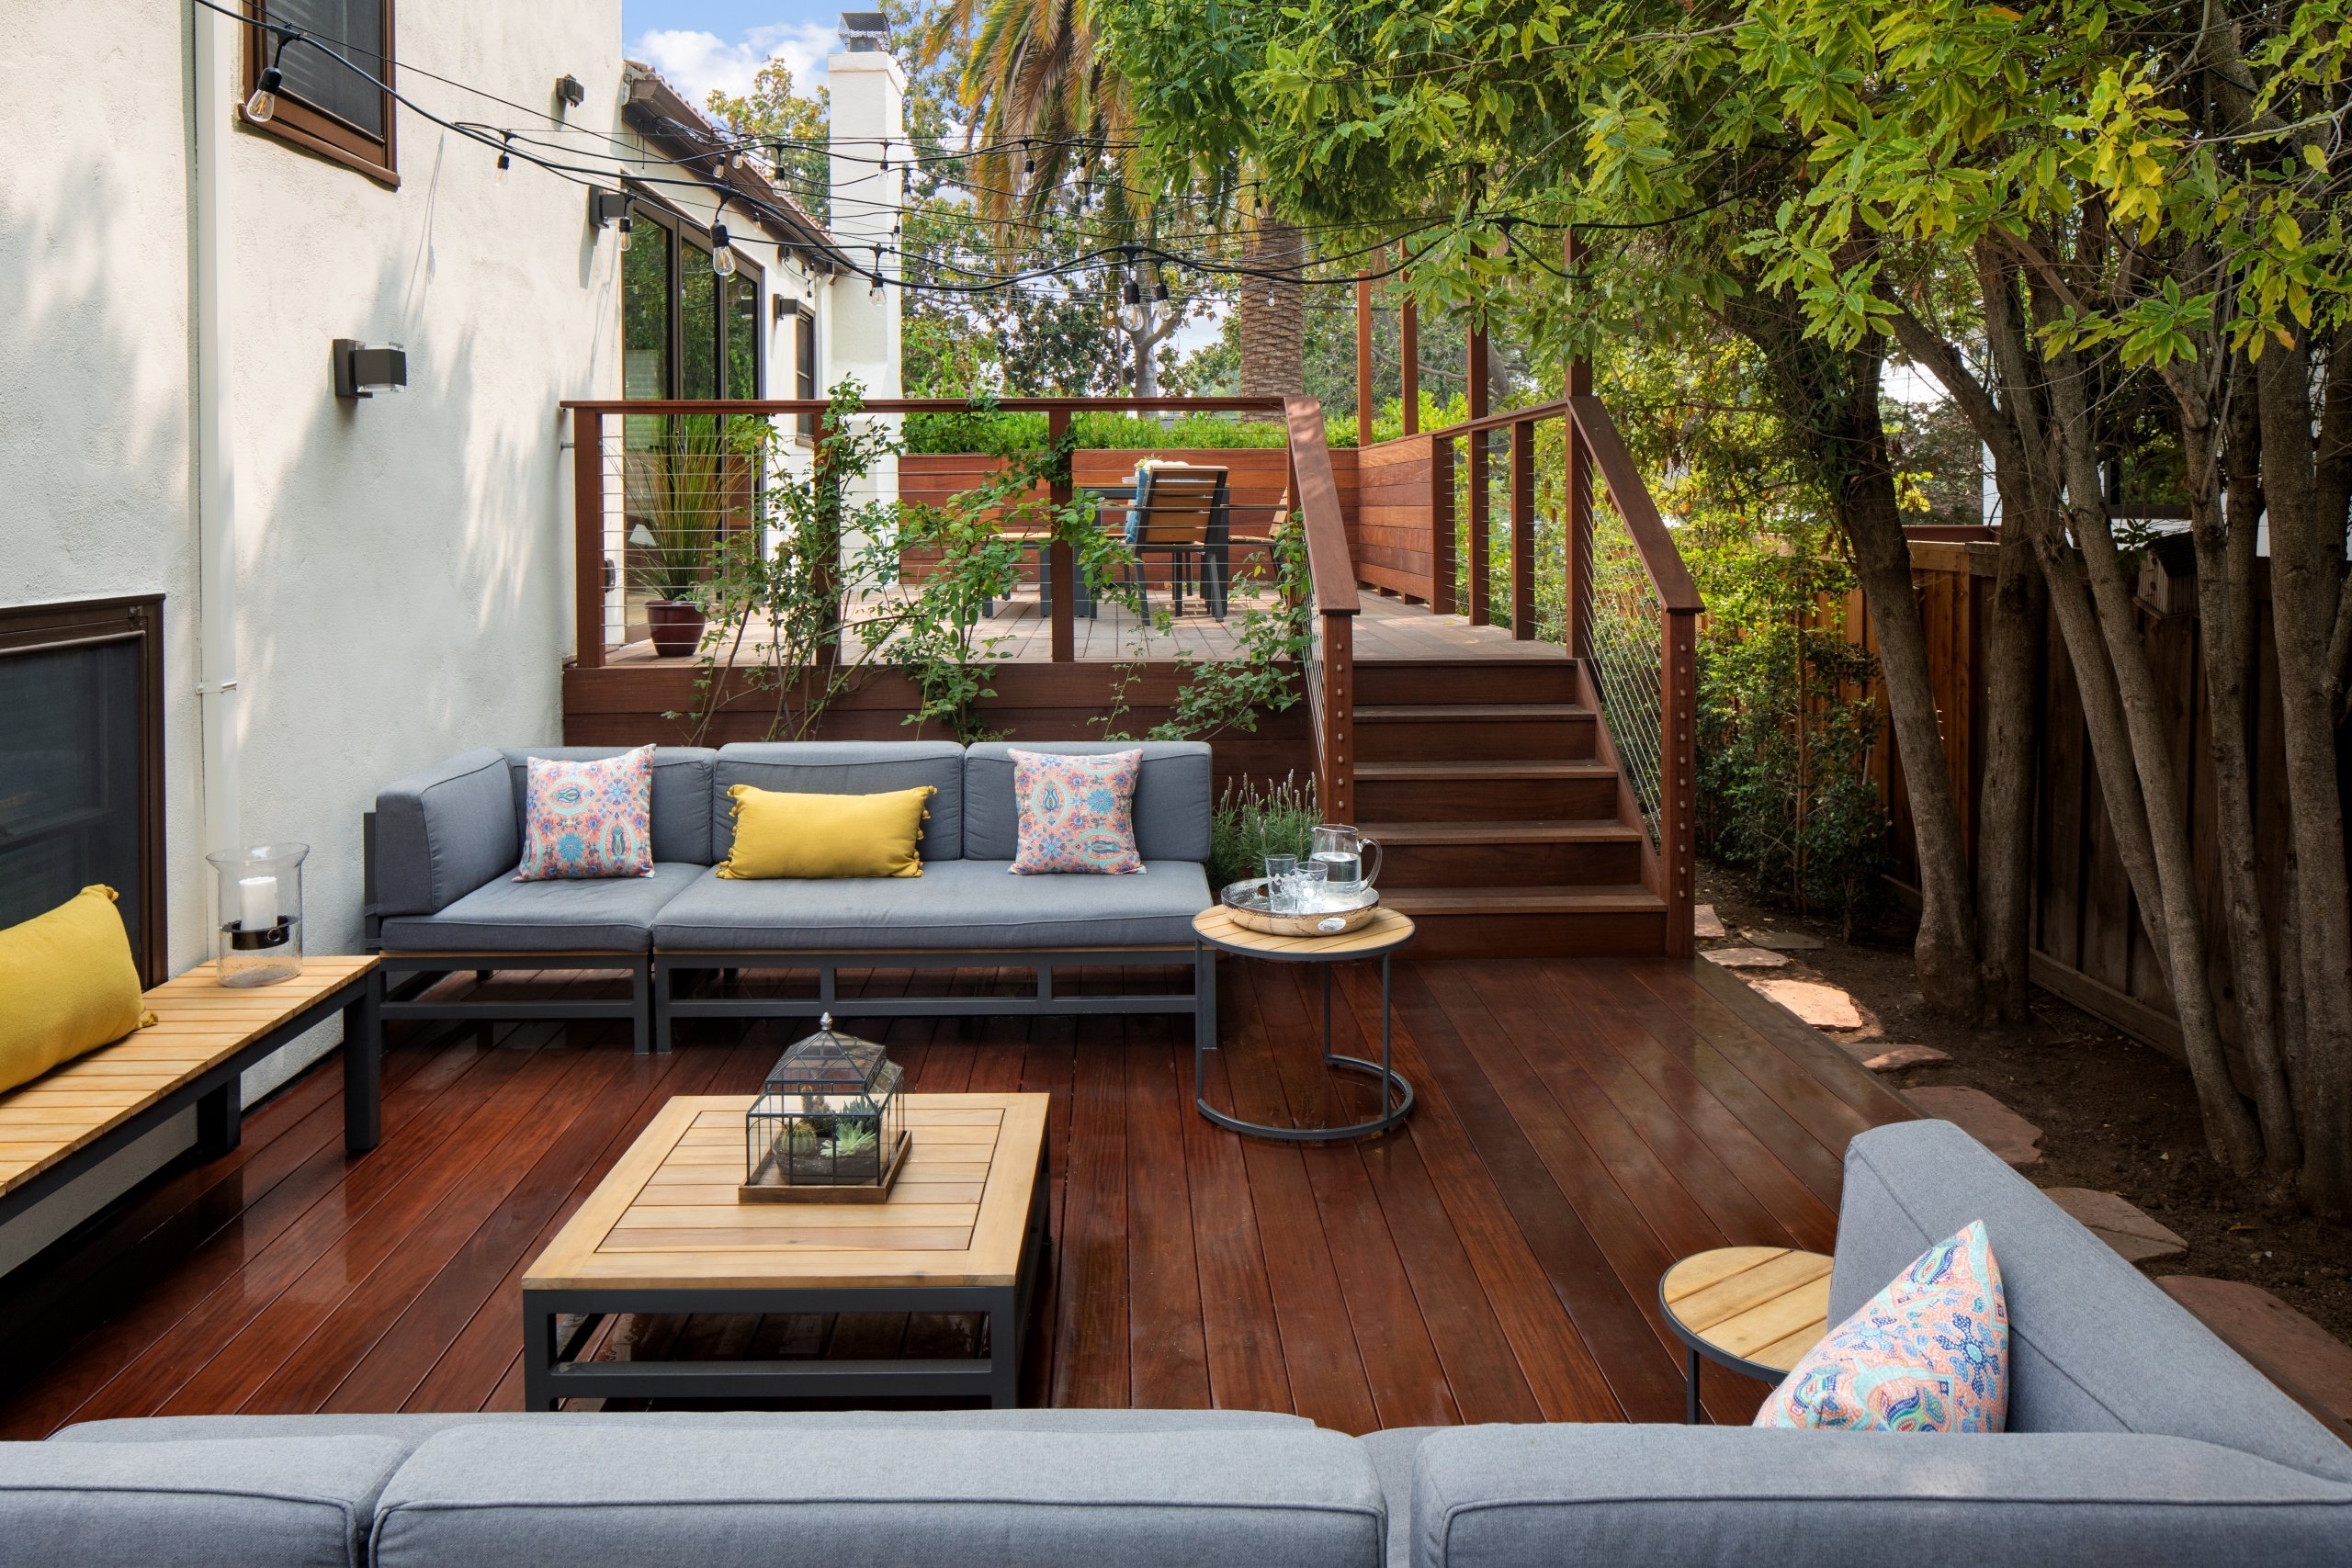 Comfortable couches in outdoor seating area on wooden deck in Mountain View